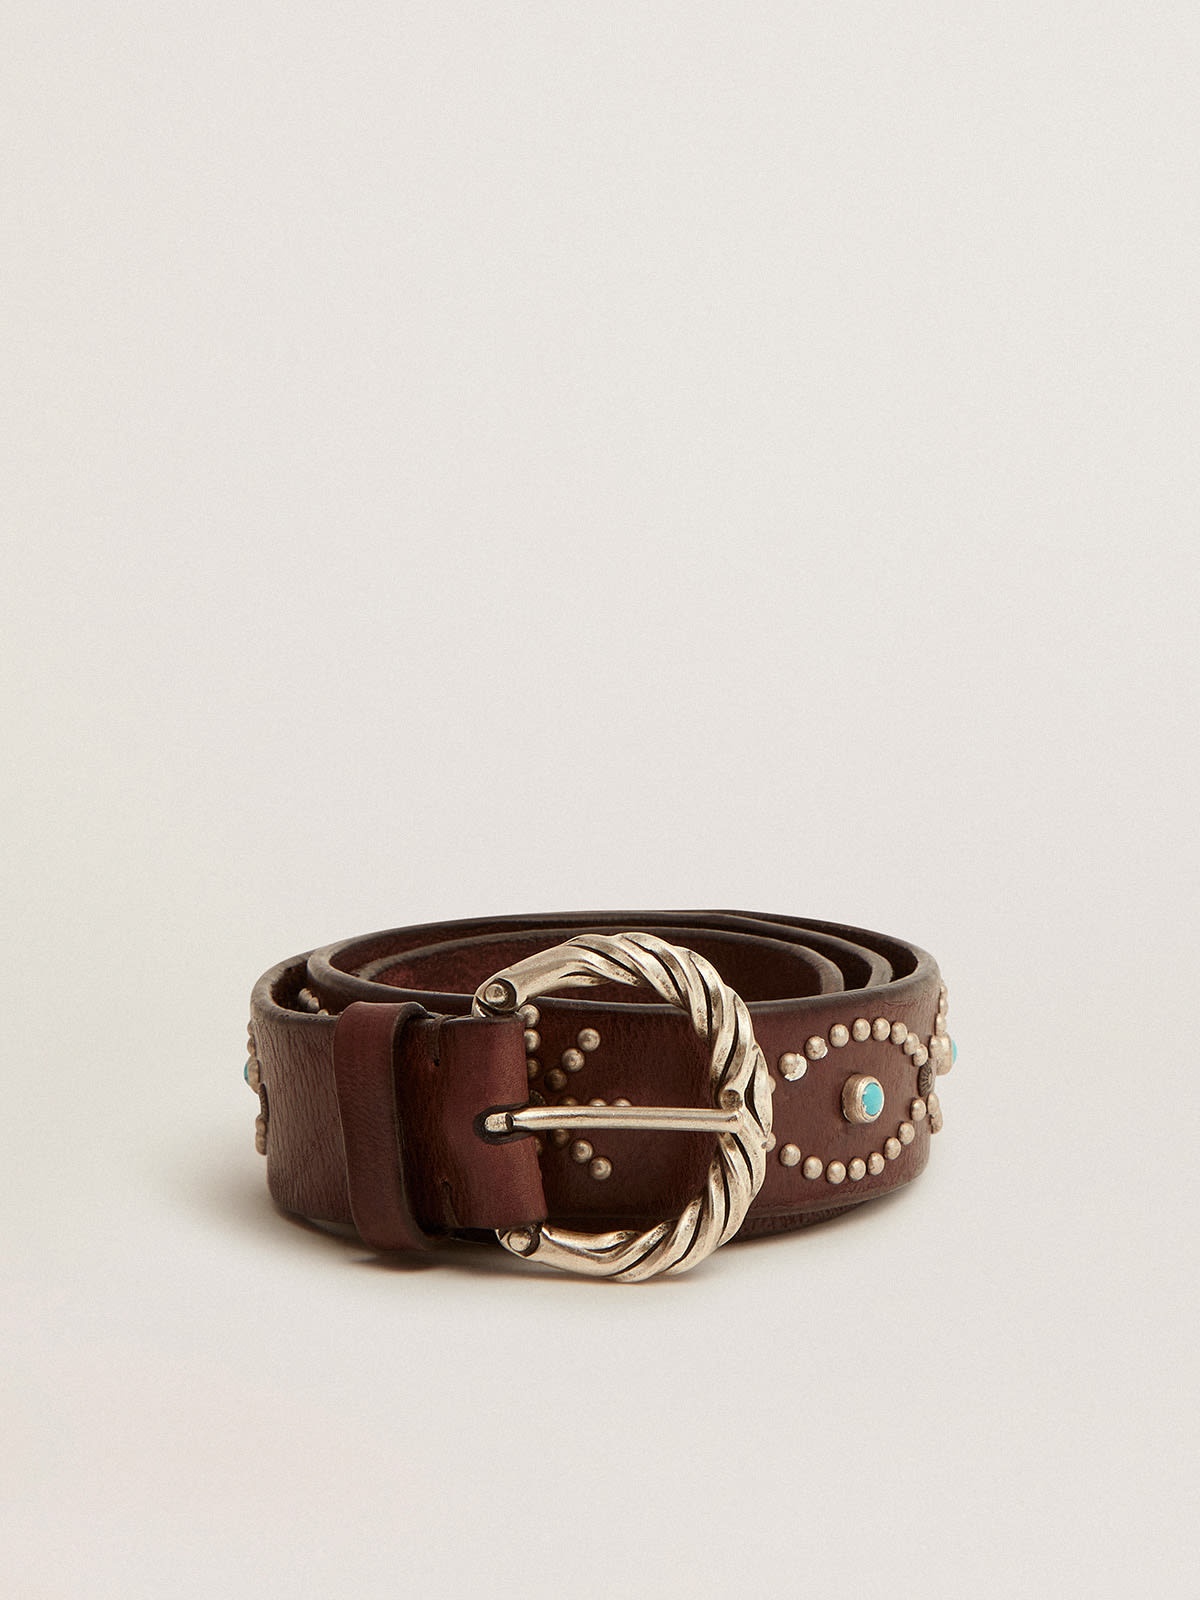 Women's belt in dark brown leather with colored studs - 1